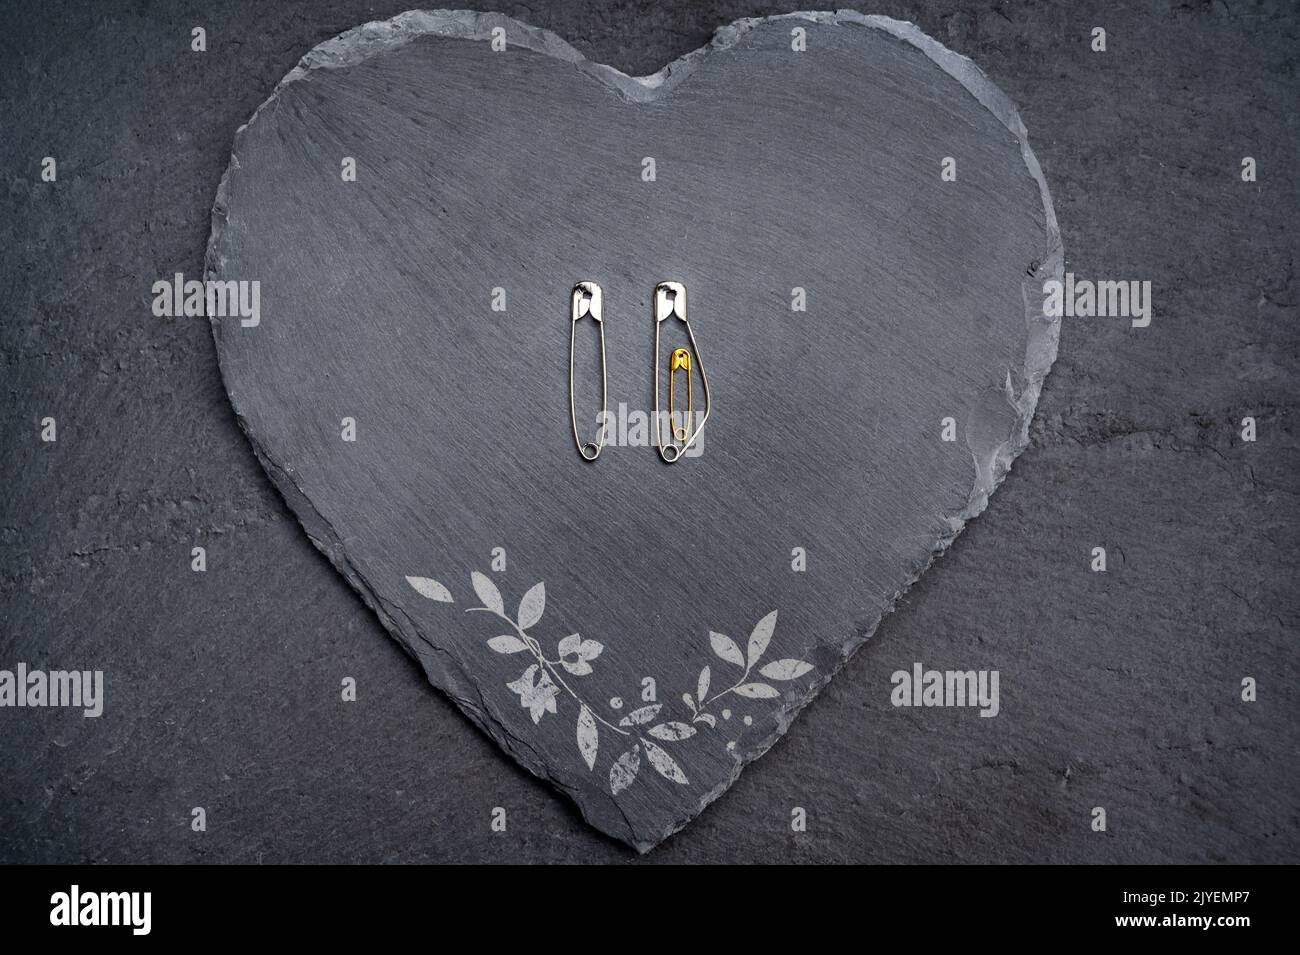 Safety pins on a heart made of slate symbolize pregnancy and family planning Stock Photo